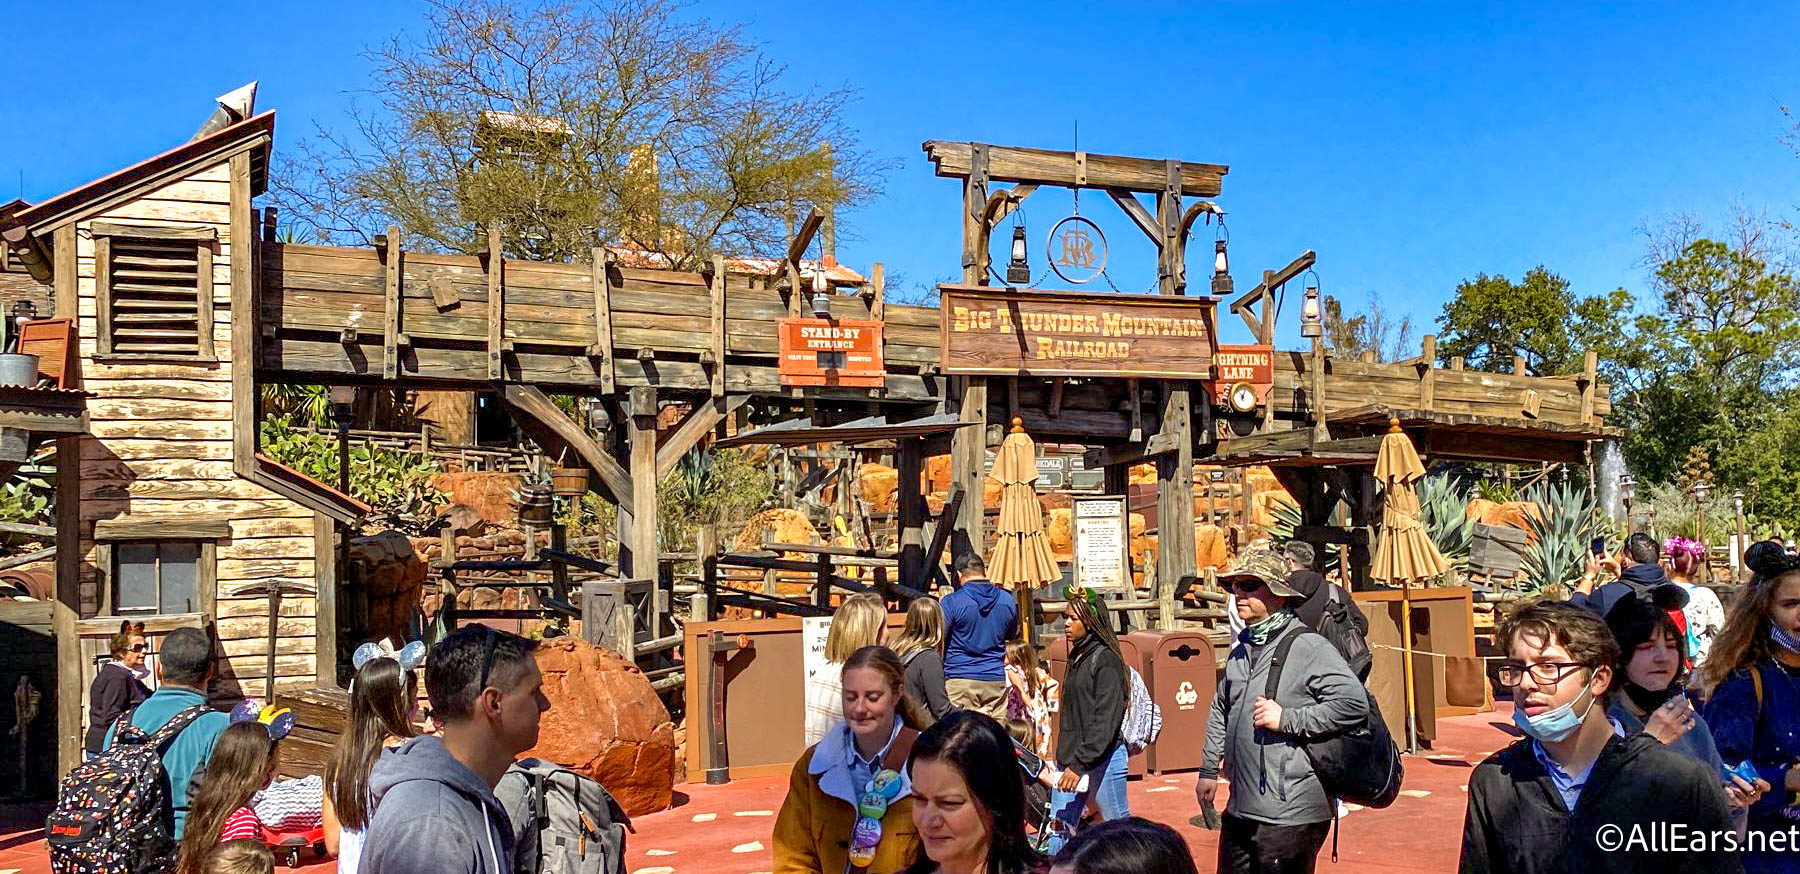 BREAKING: Walt Disney World Railroad at Magic Kingdom Reopens After 4 Years  - WDW News Today